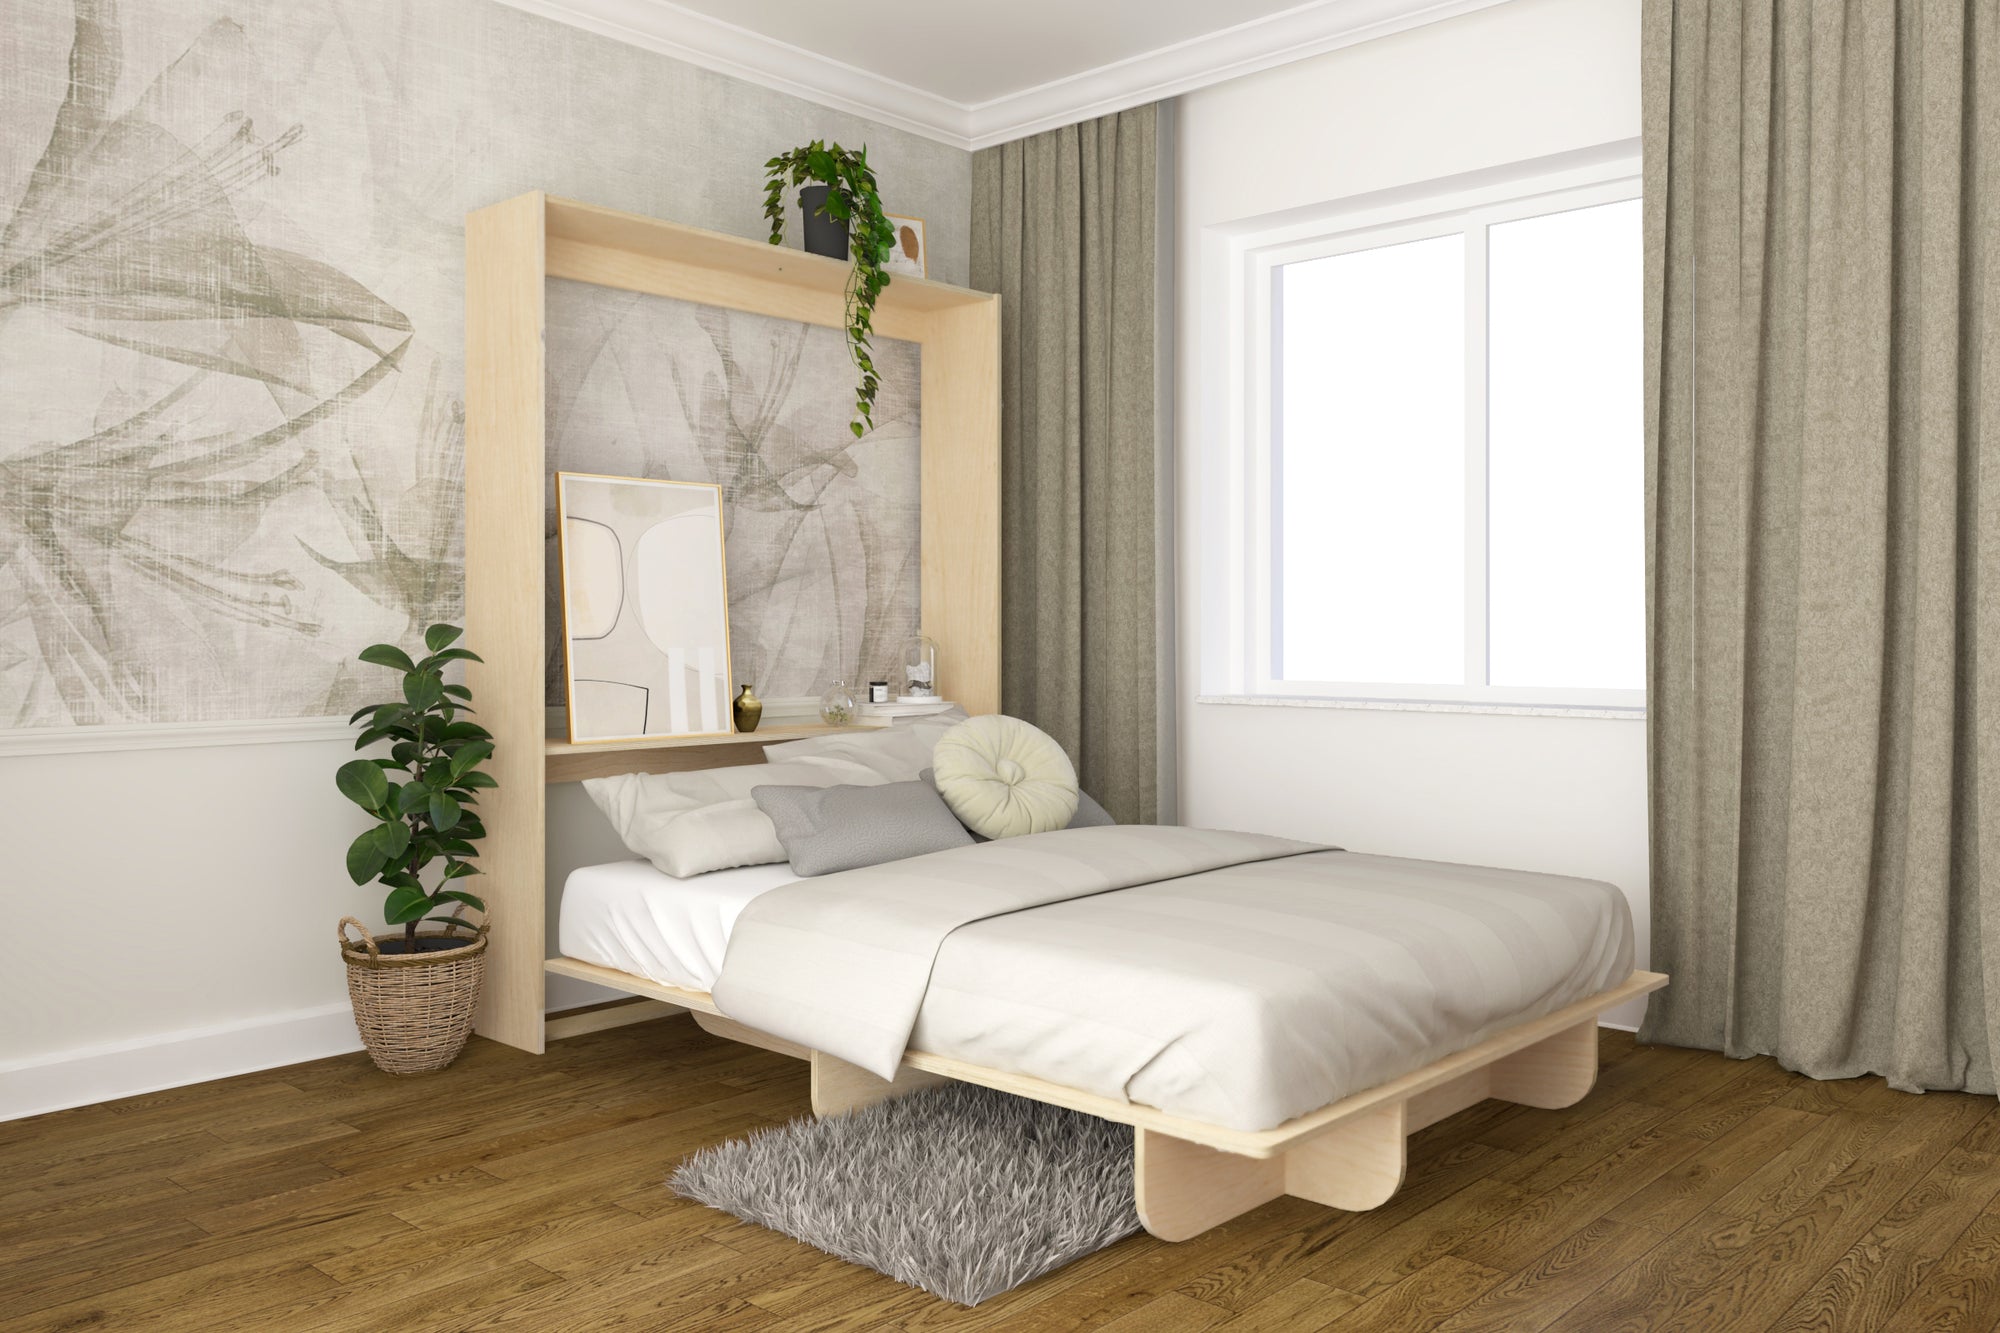 Queen vertical murphy bed with neutral bedsheets surrounded by plants